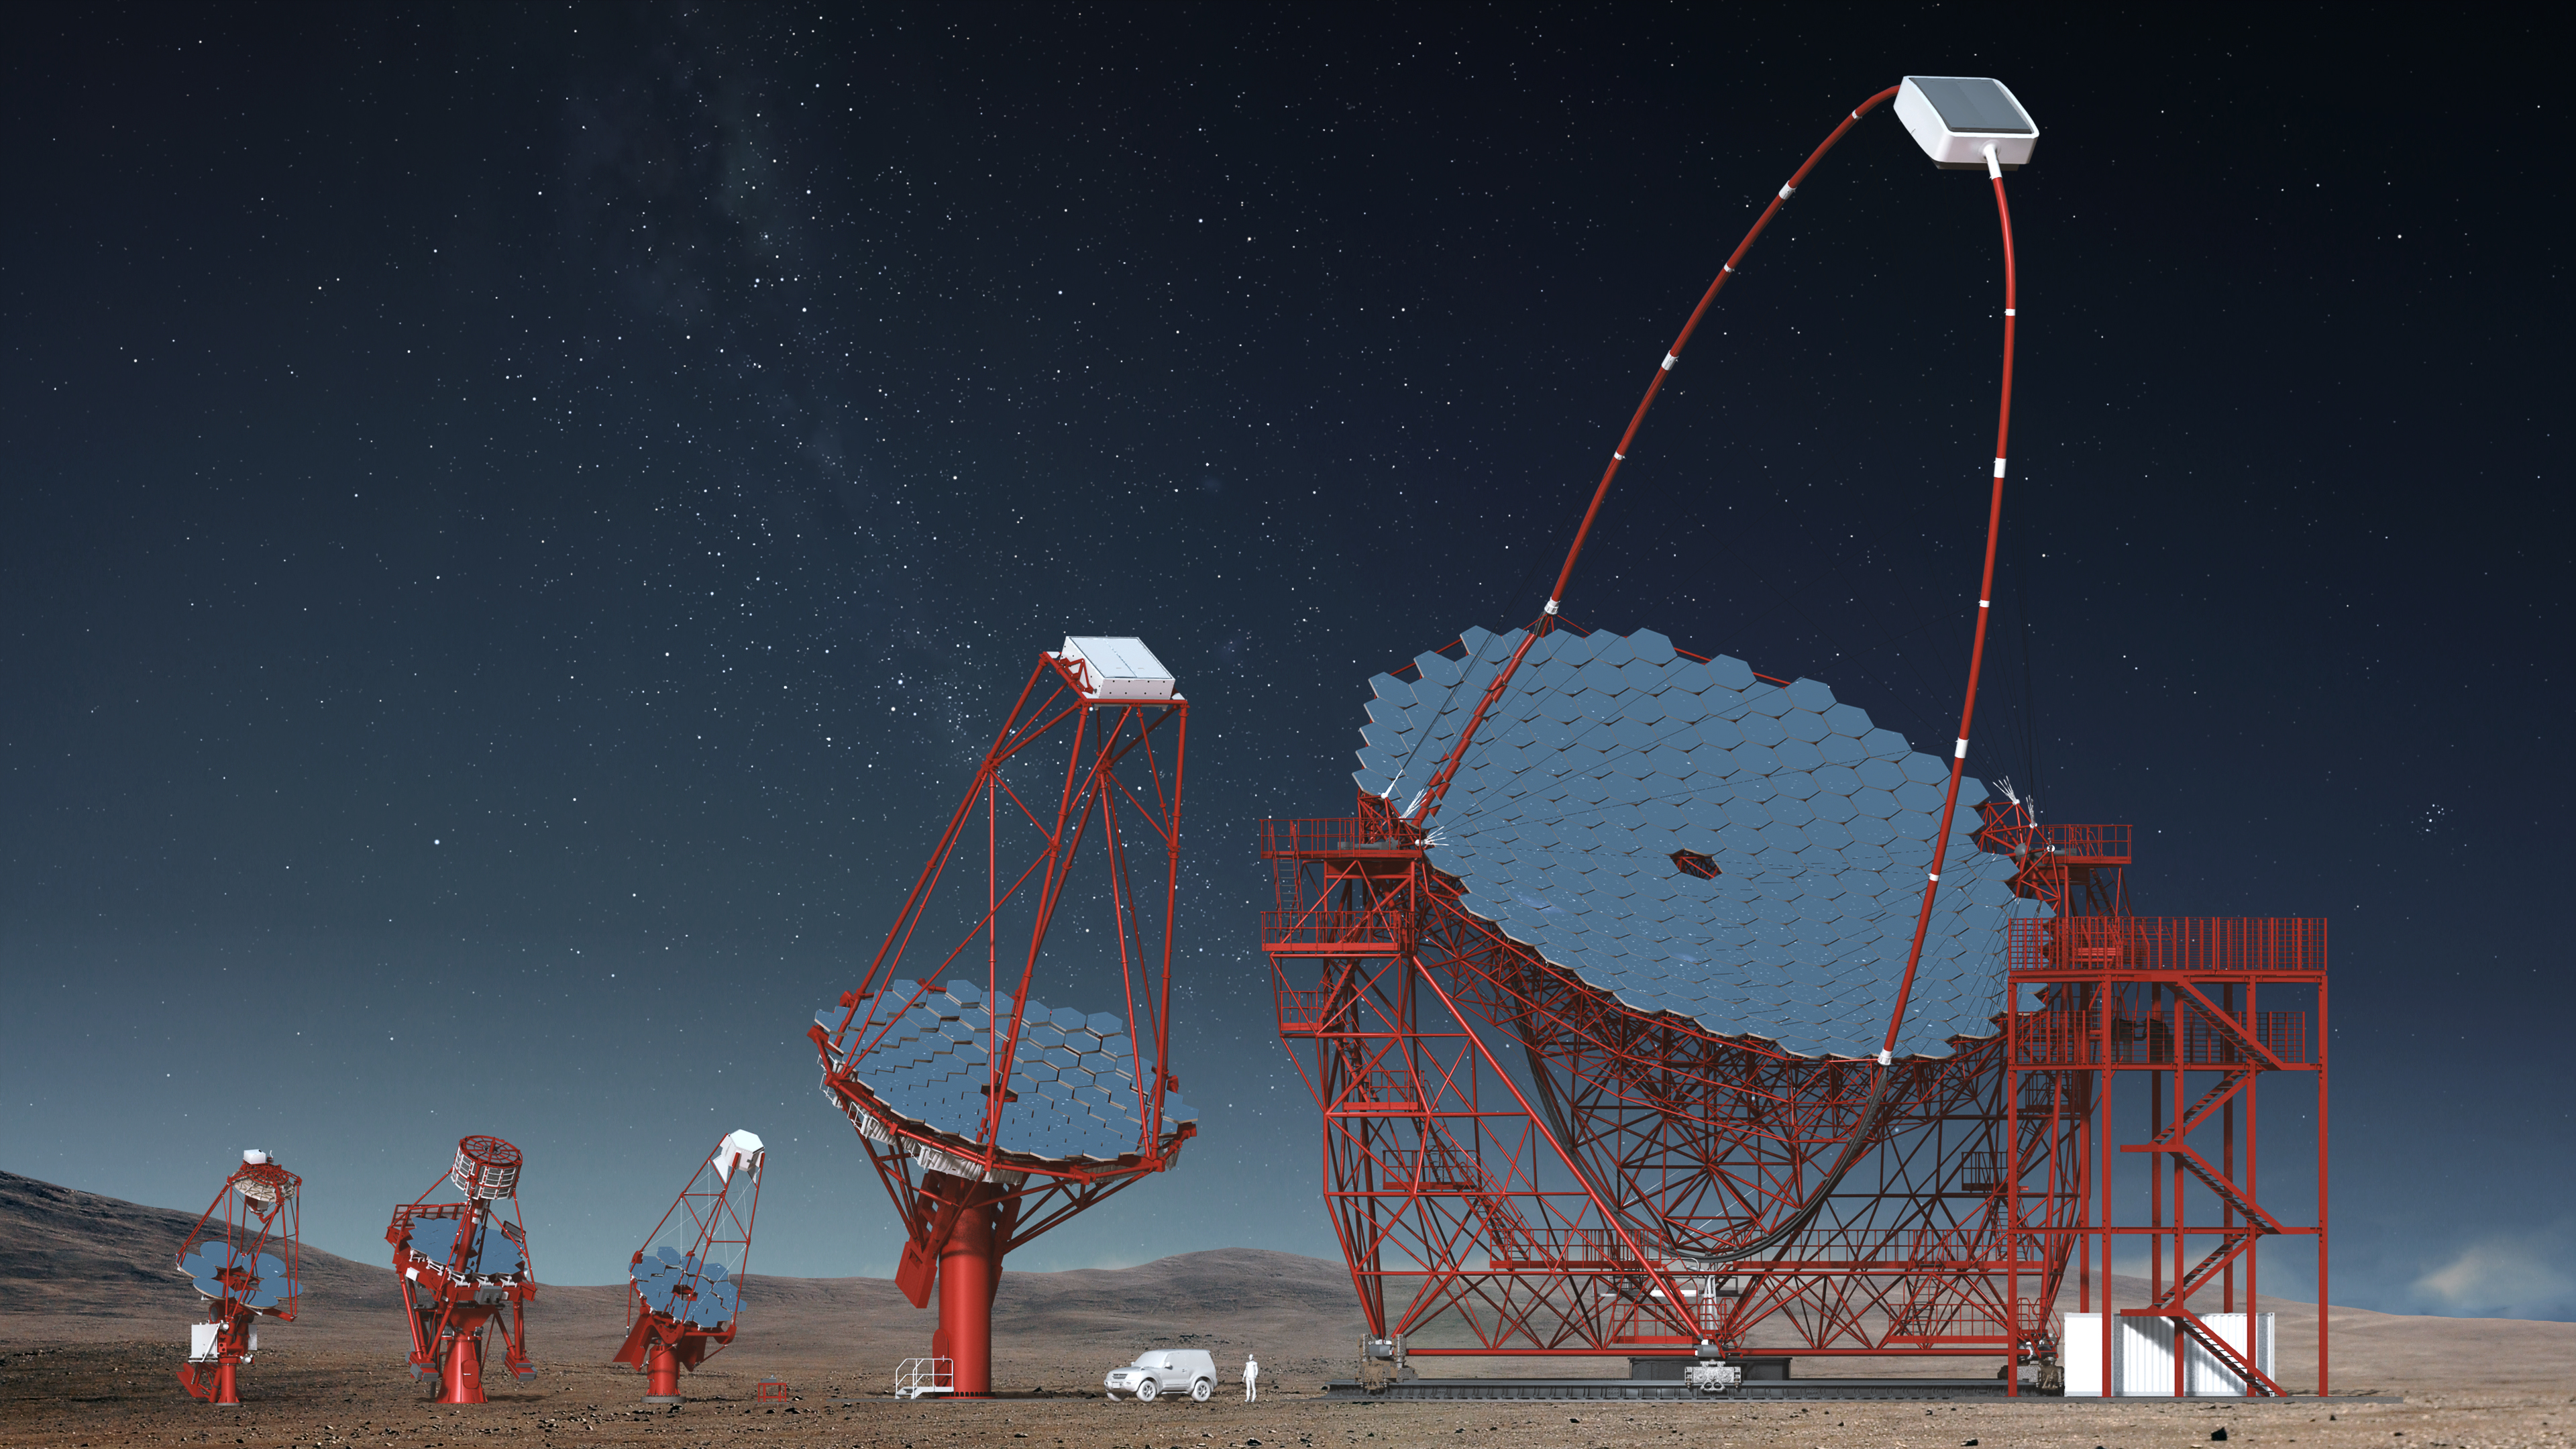 INAF hosts the preliminary round to set up  the Cherenkov Telescope Array Observatory-ERIC